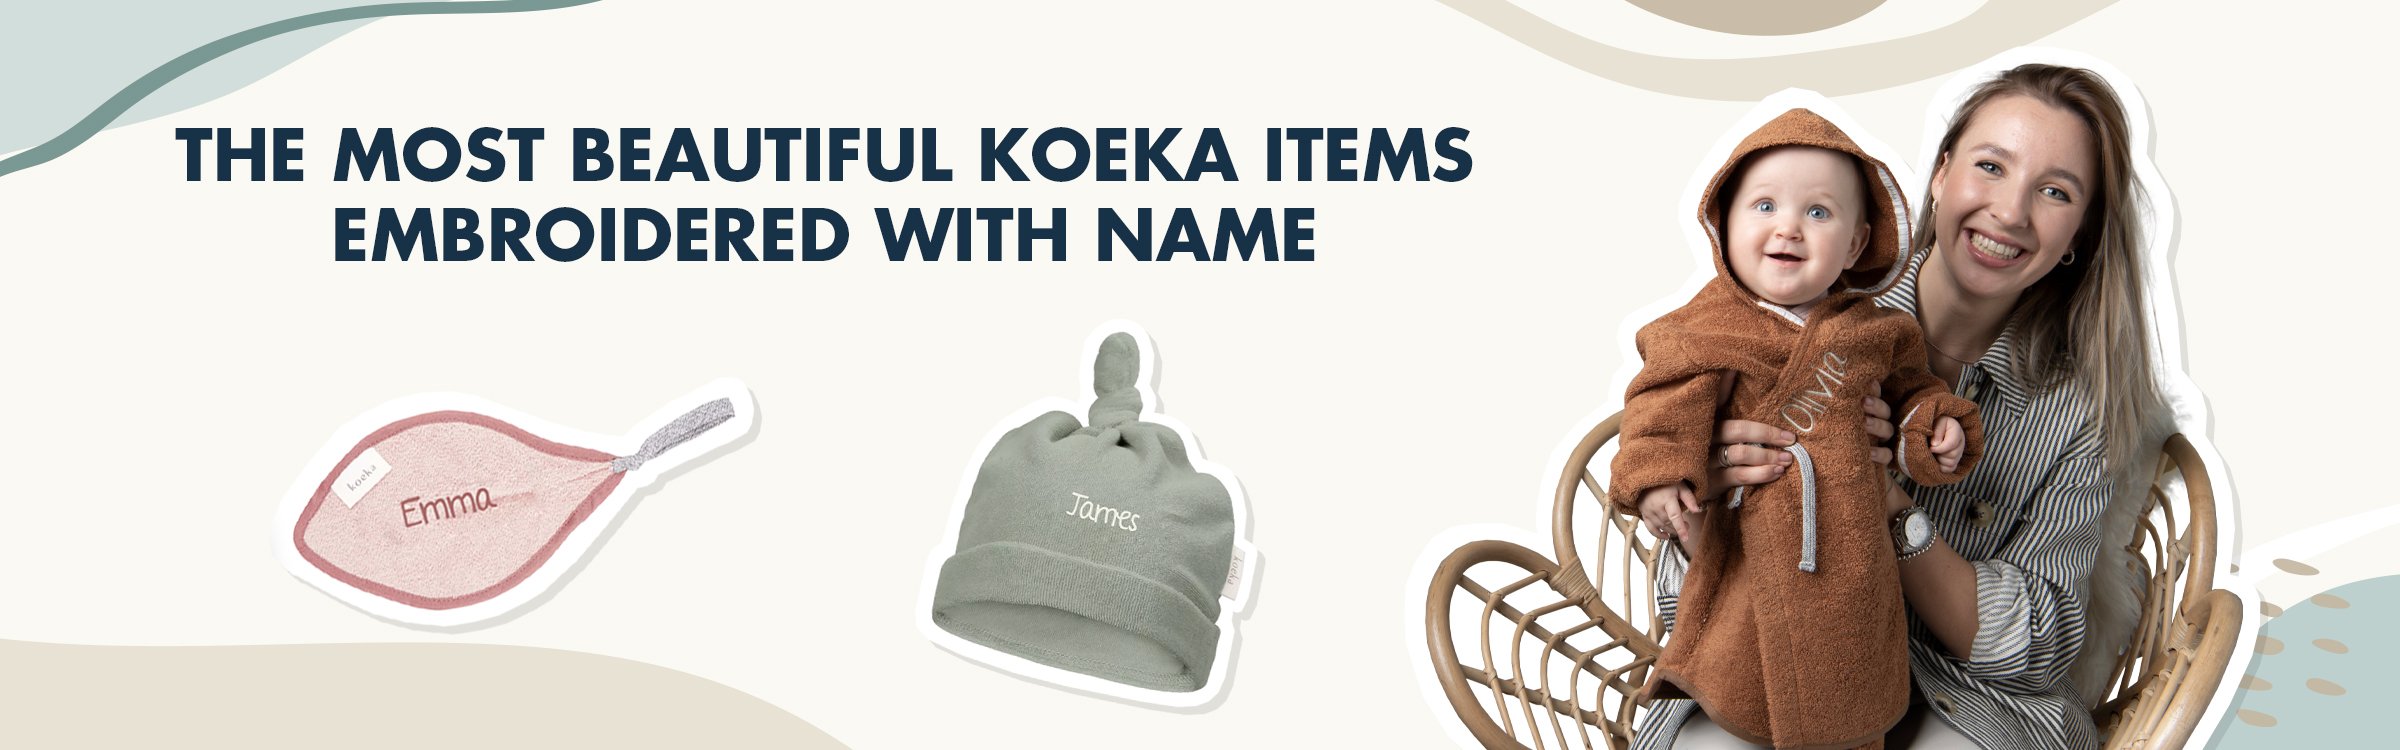 Banner embroider the cutest koeka items with name